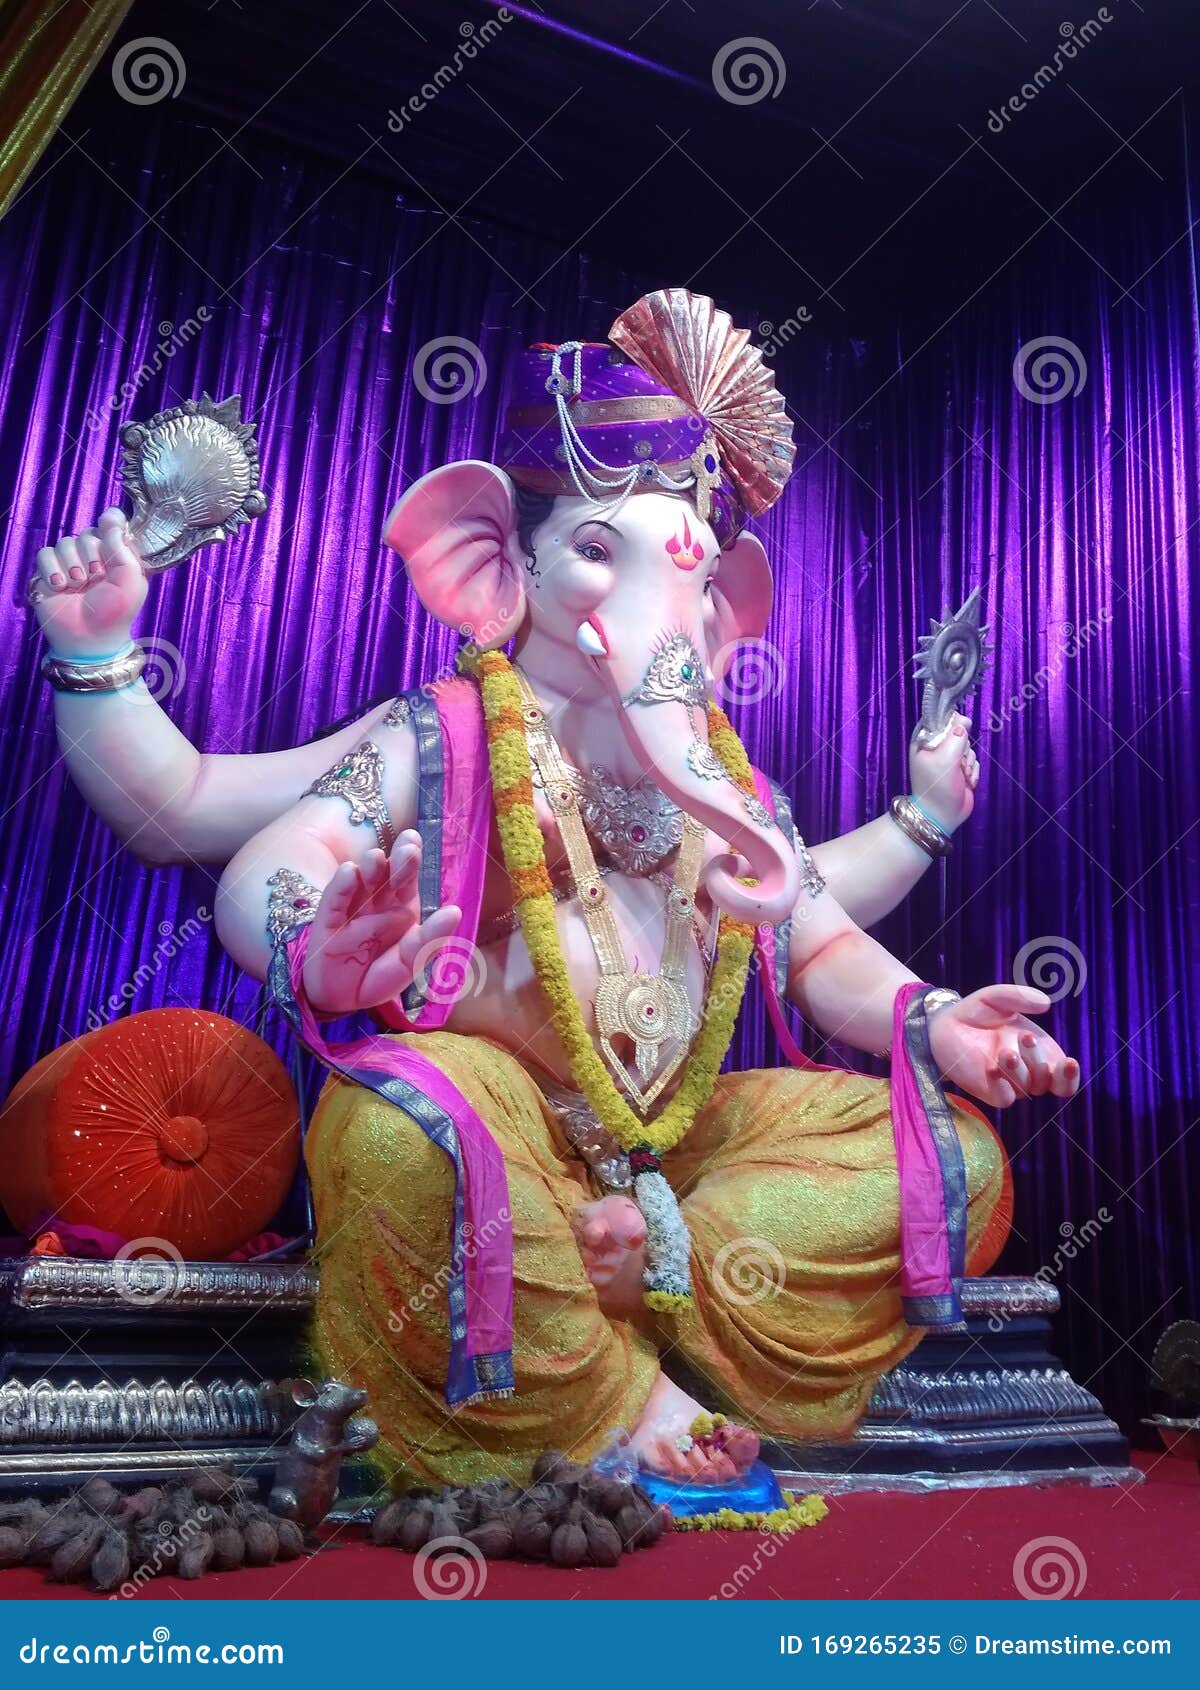 Indian Idol of Lord Ganesha Stock Image - Image of biggest, lord: 169265235